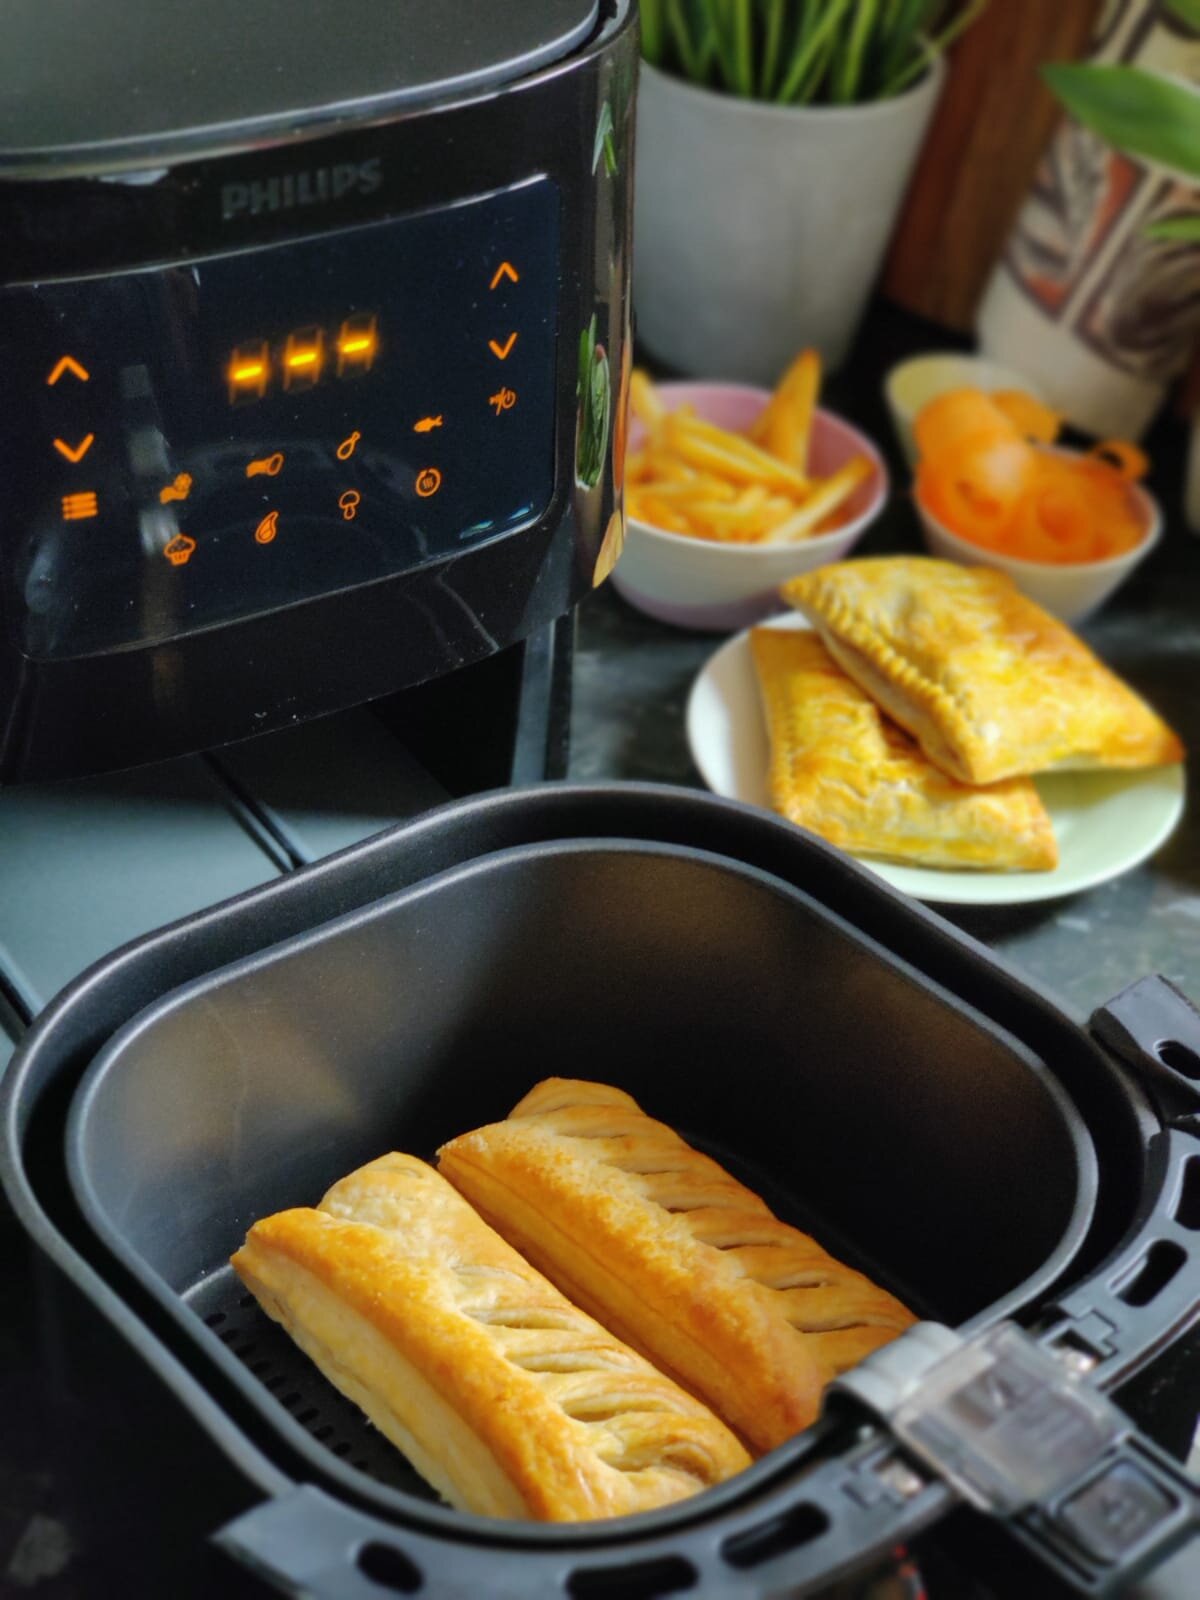 Philips essential airfryer review